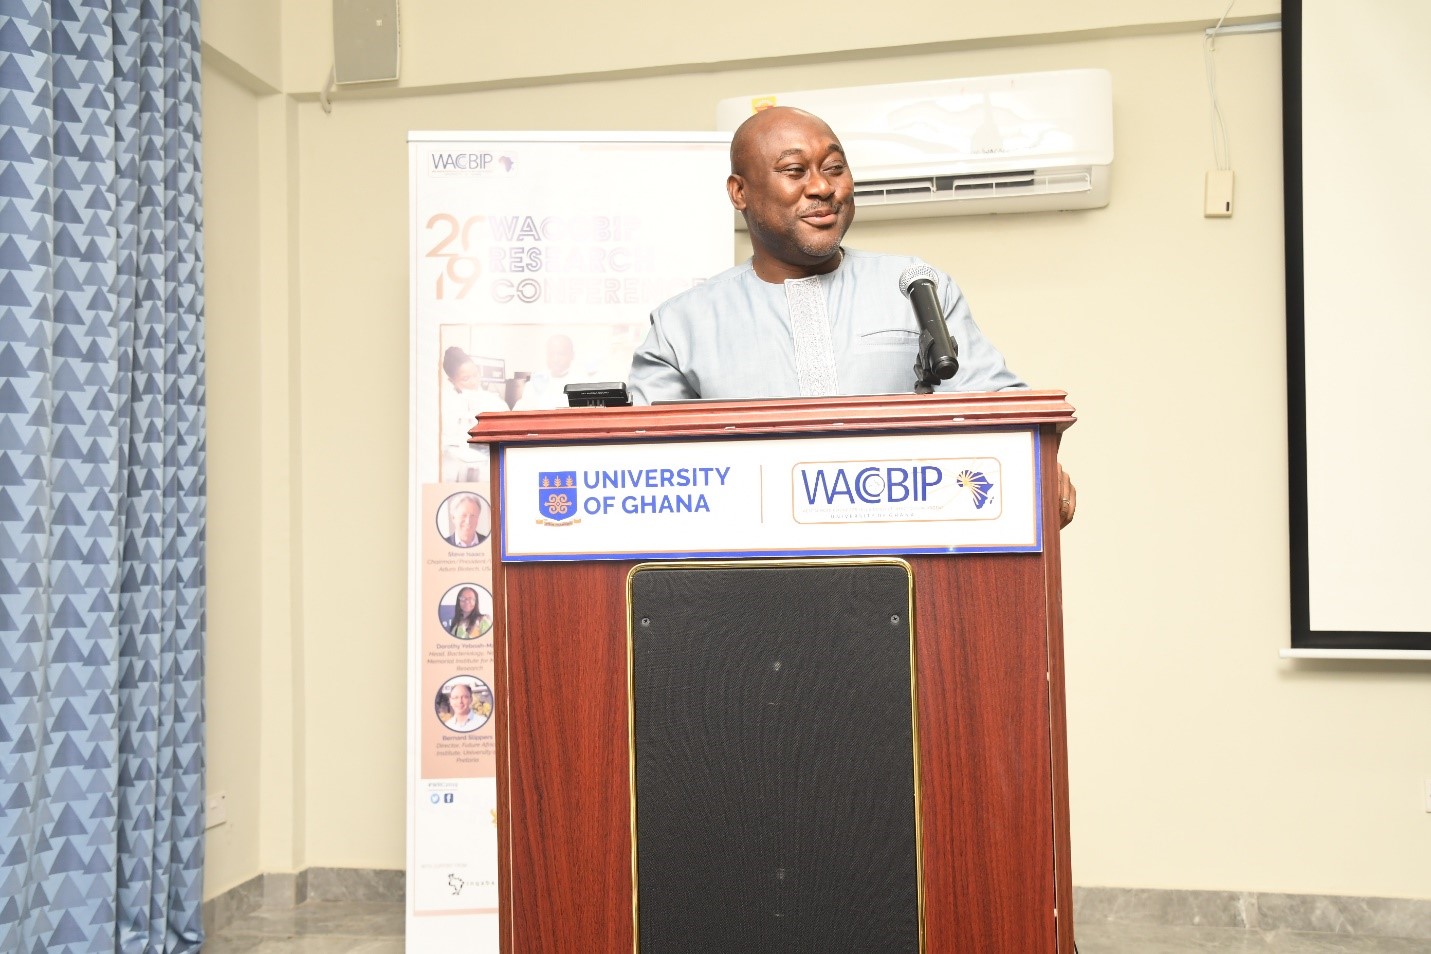 Prof. Gordon Awandare, Director of WACCBIP, delivers his welcome address.